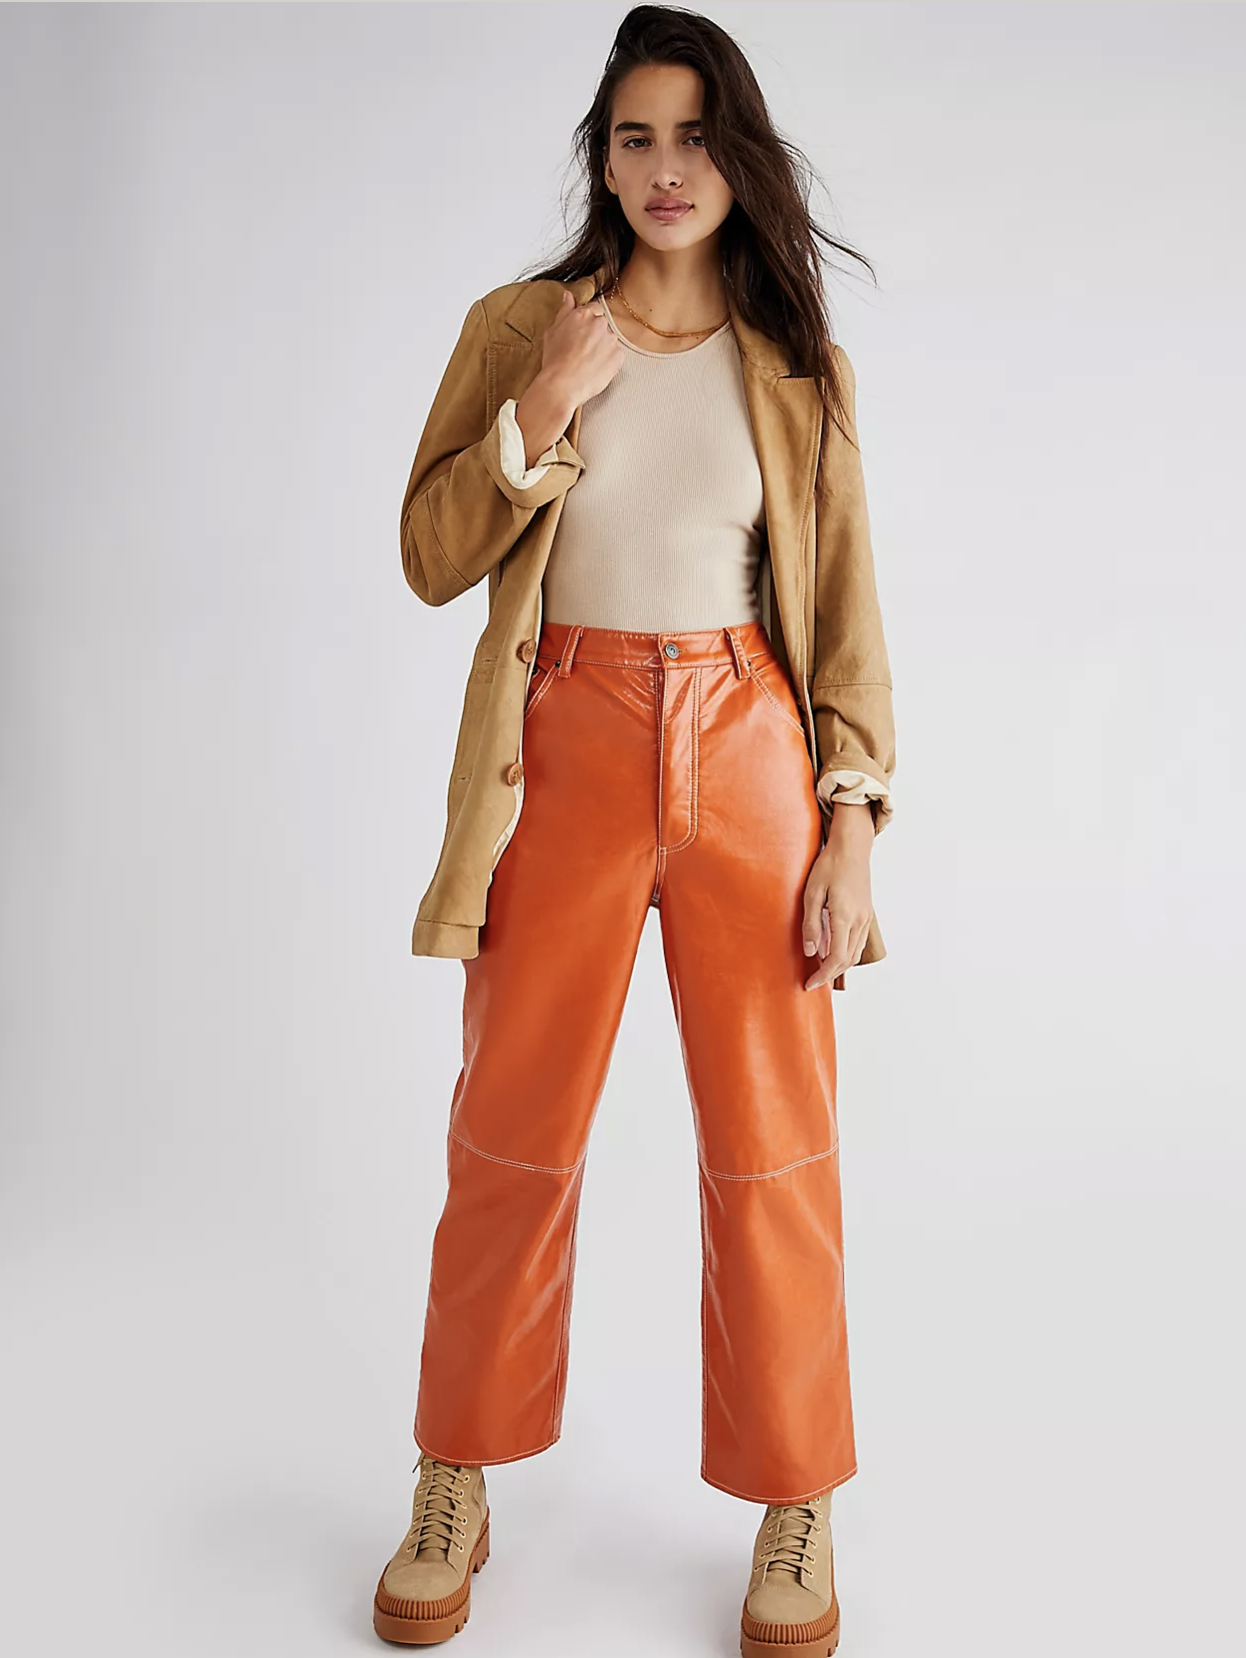 Free People Rebel At Heart Faux Leather Pants